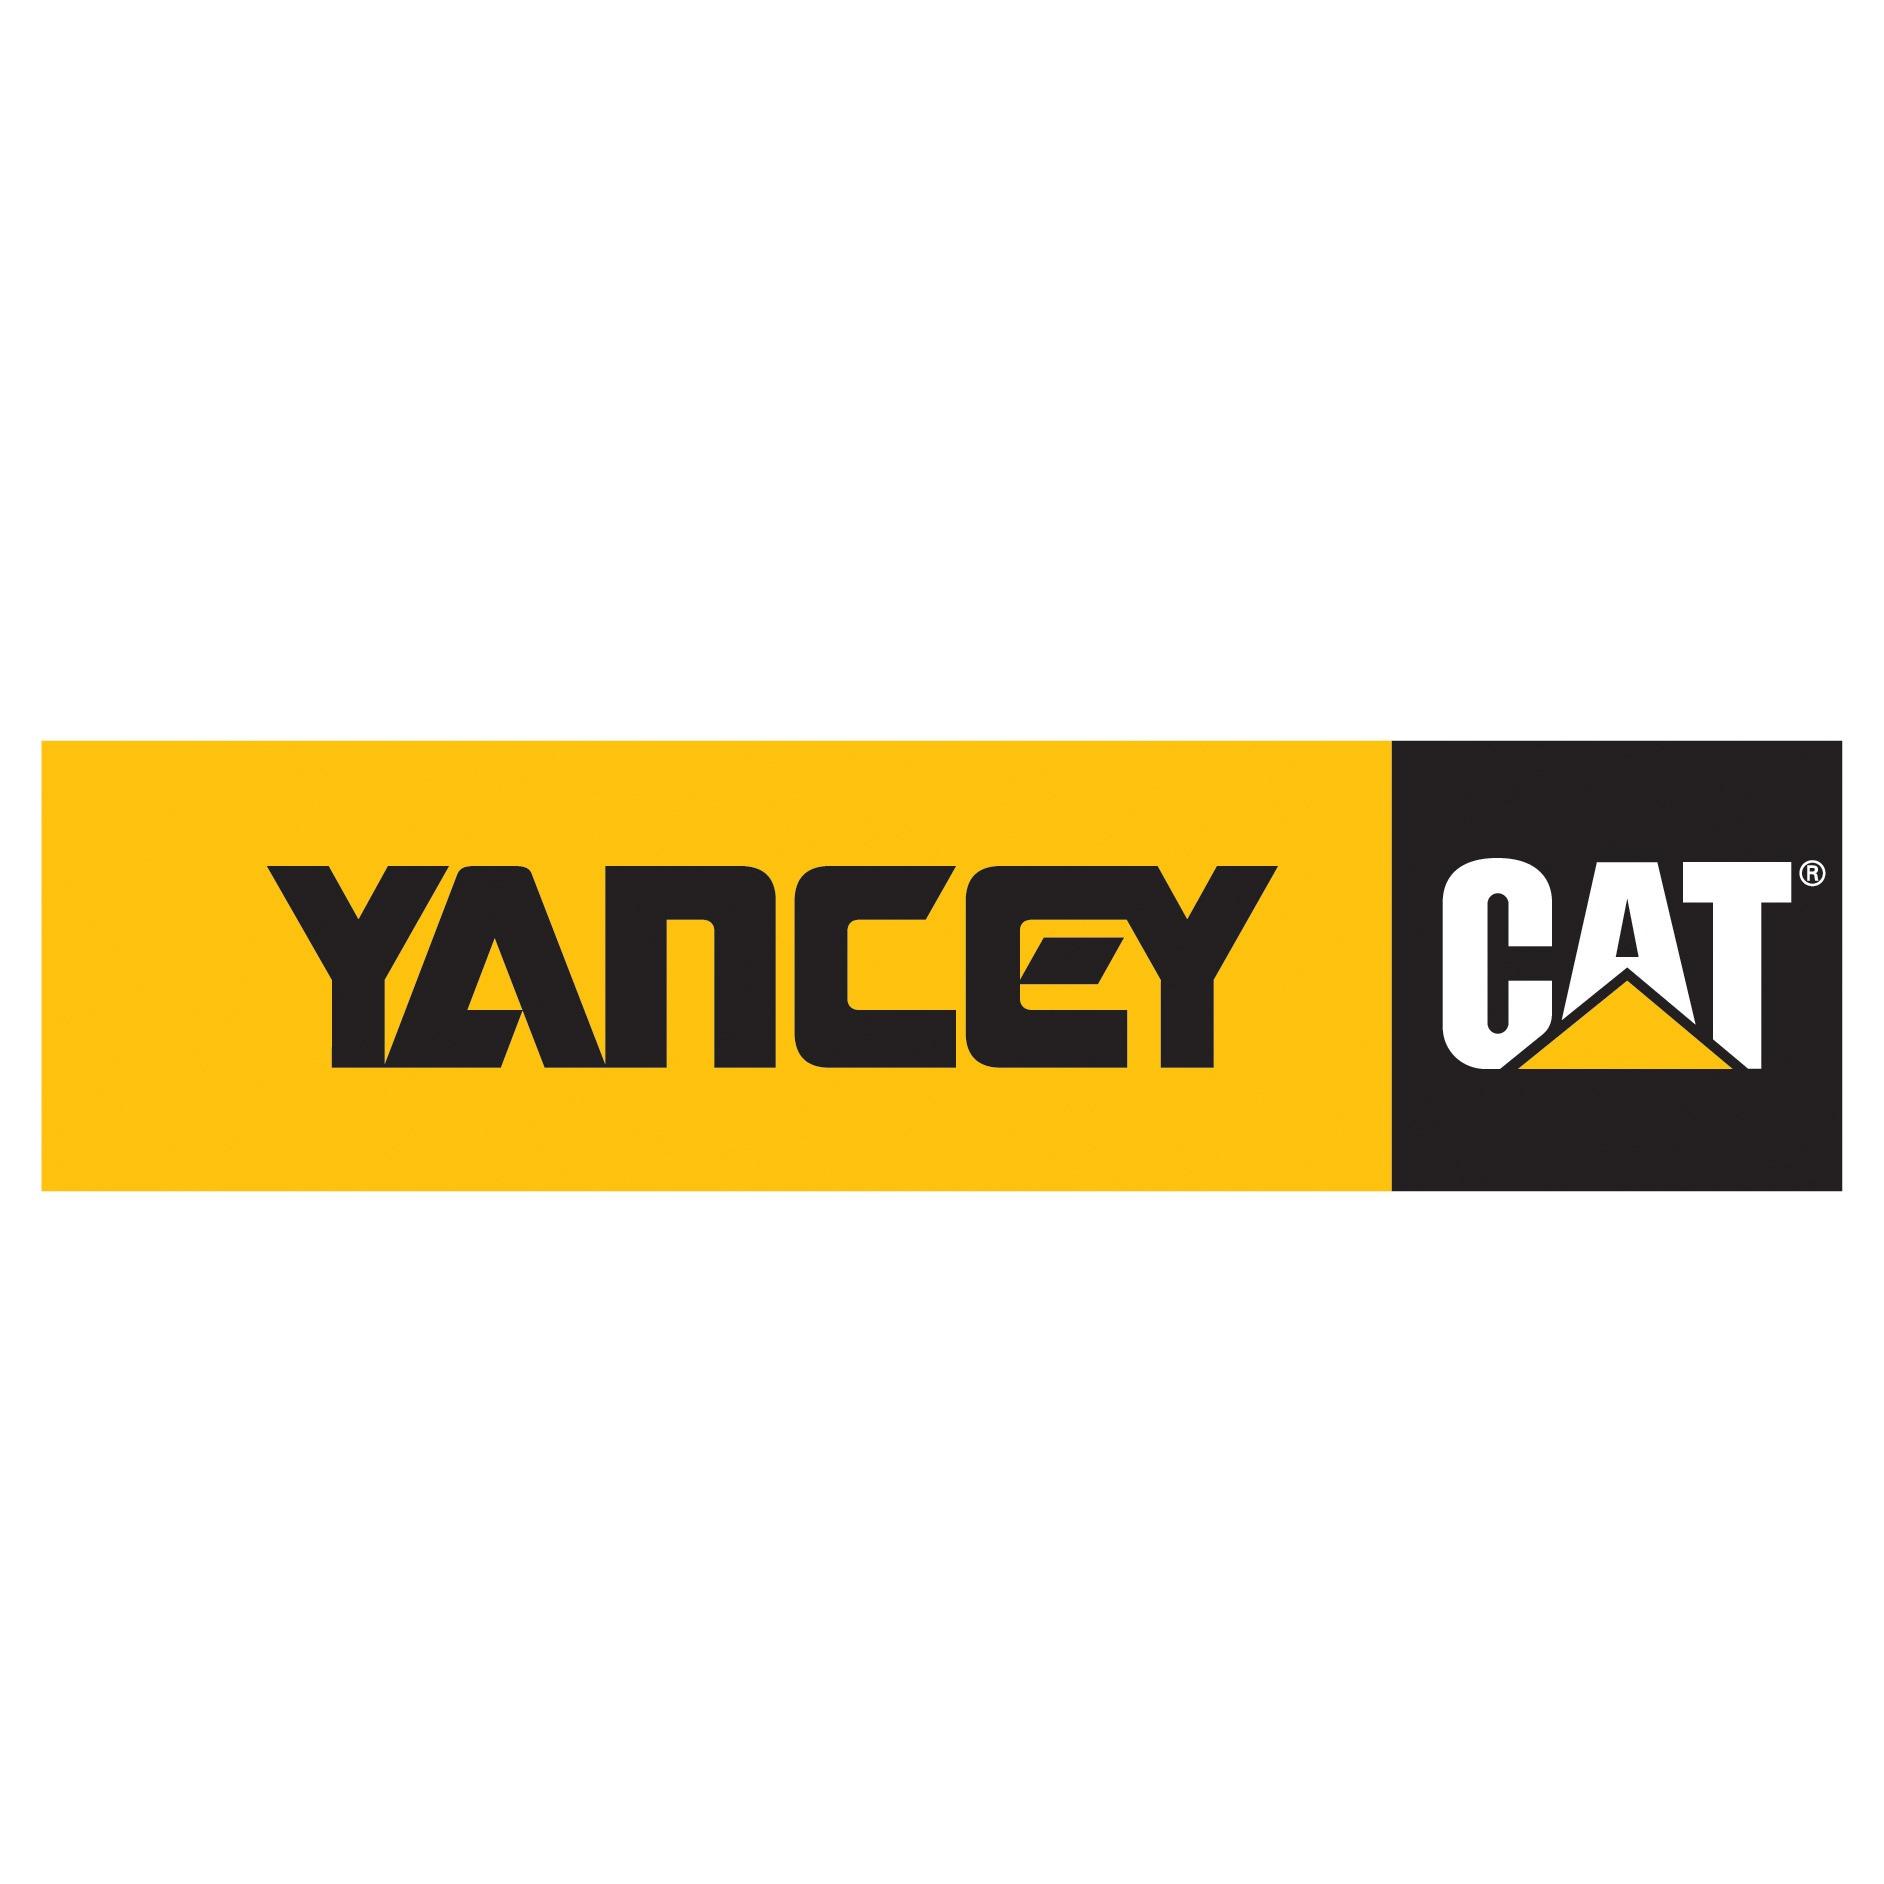 Yancey Bros. Co. Compact Construction Equipment Photo